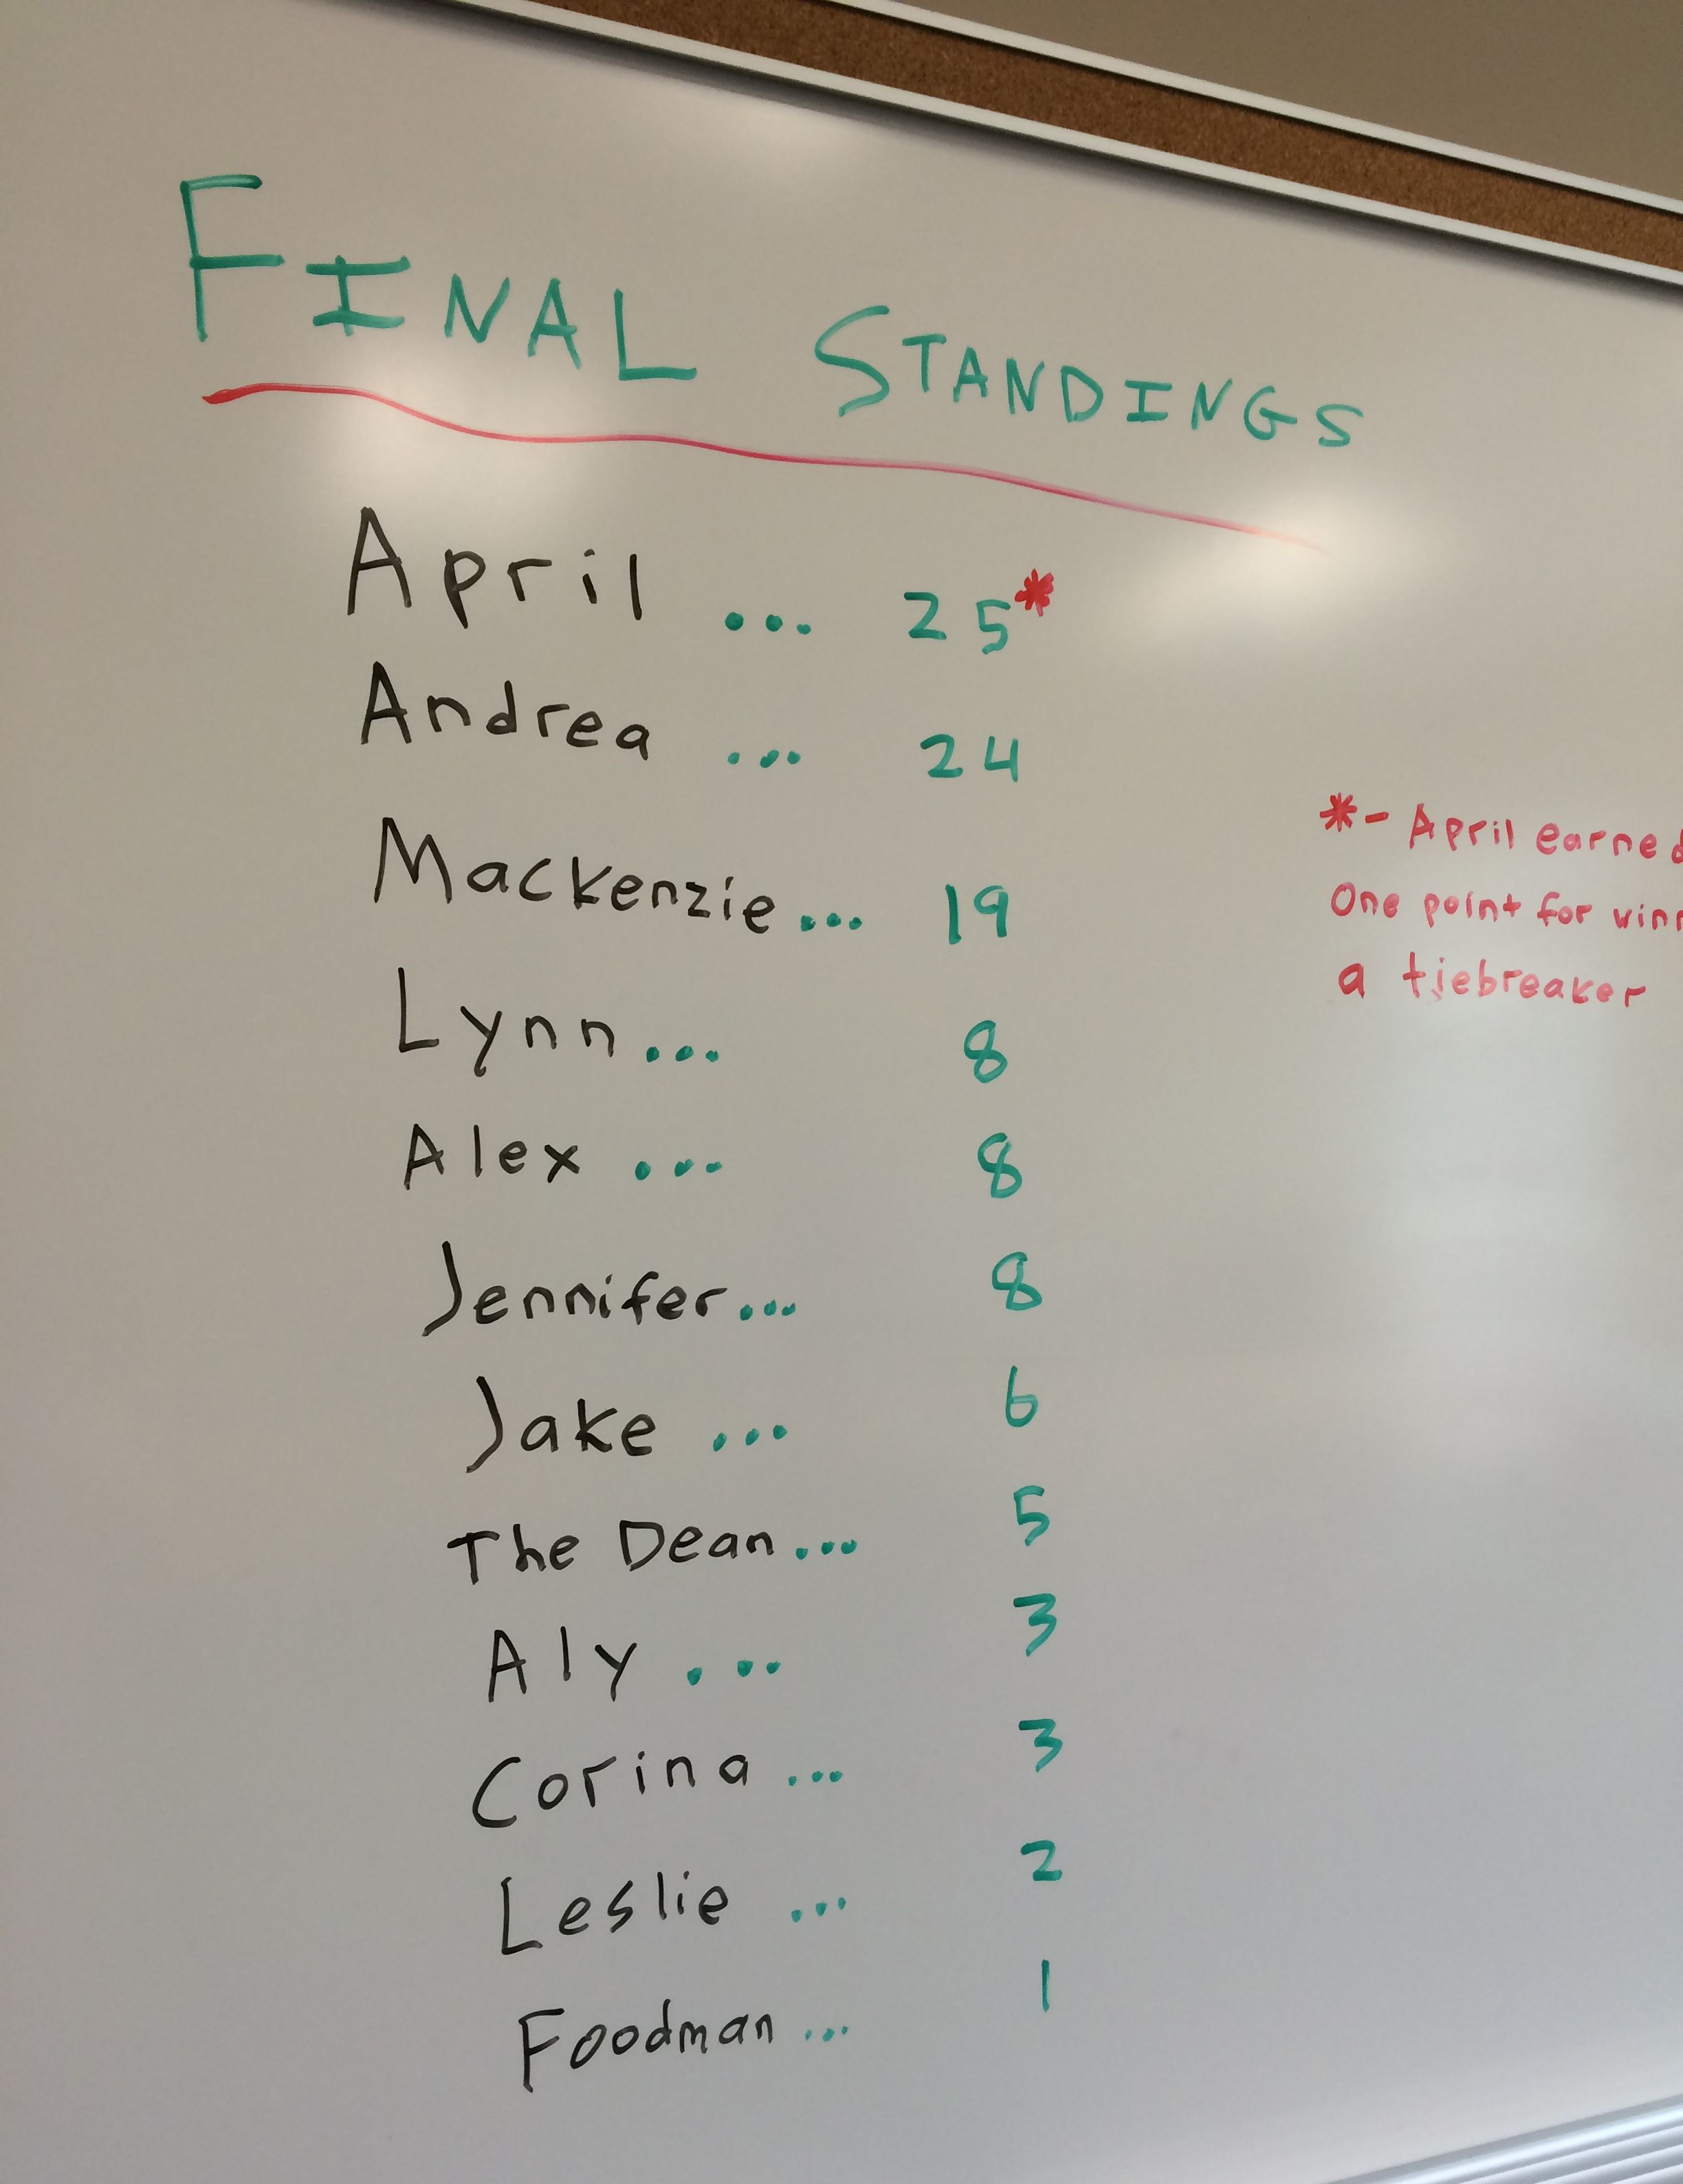 These are the final standings from this semester's competition. 